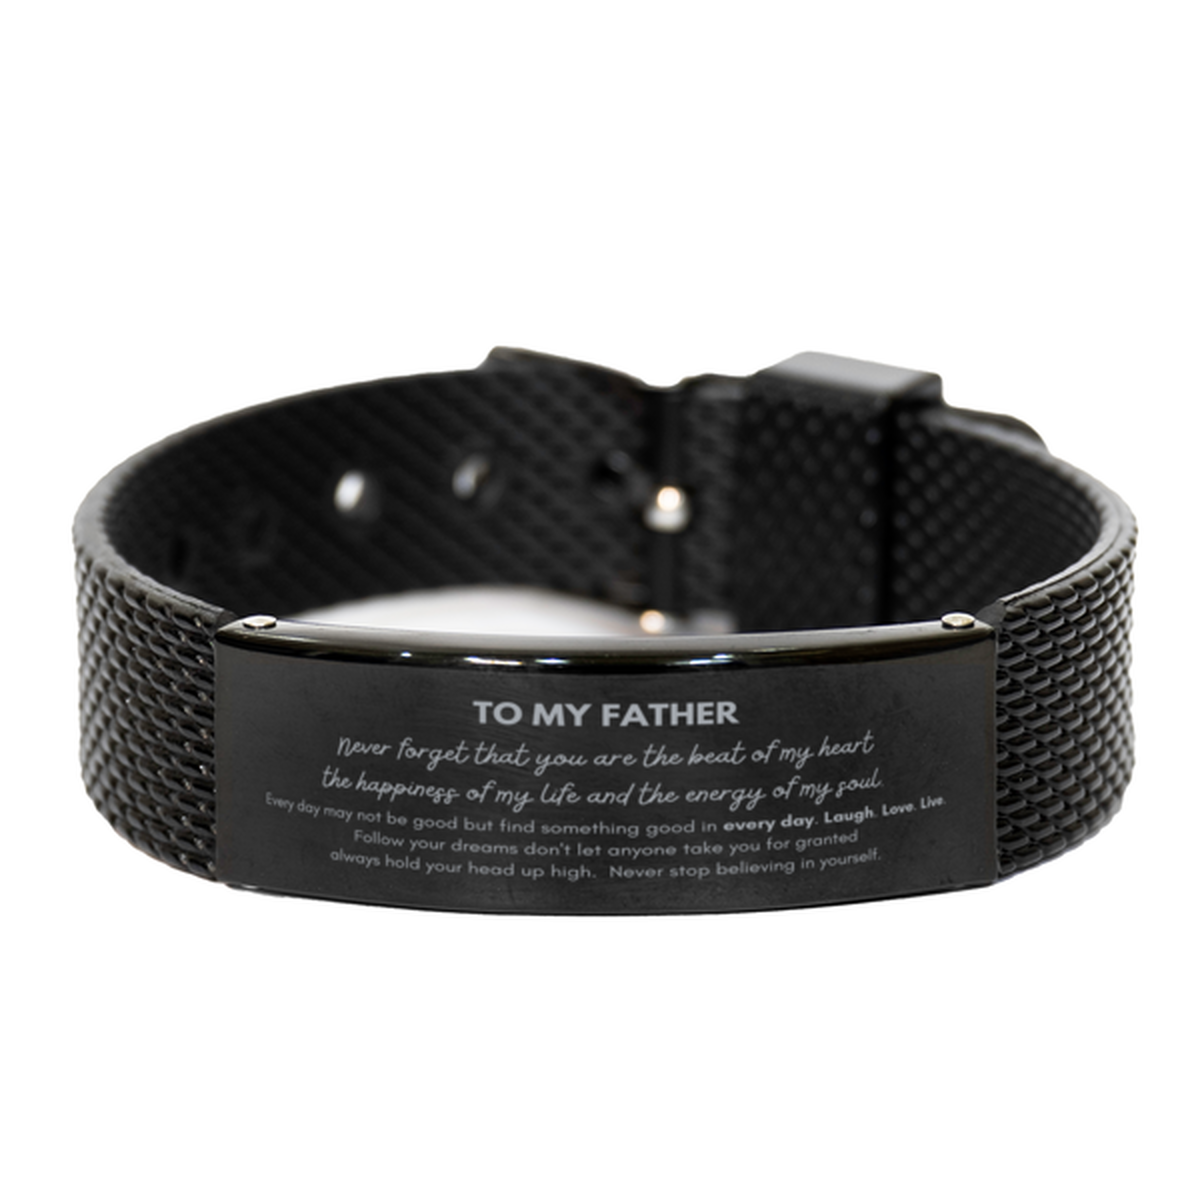 To My Father Bracelet Gifts, Christmas Father Black Shark Mesh Bracelet Present, Birthday Unique Motivational For Father, To My Father Never forget that you are the beat of my heart the happiness of my life and the energy of my soul